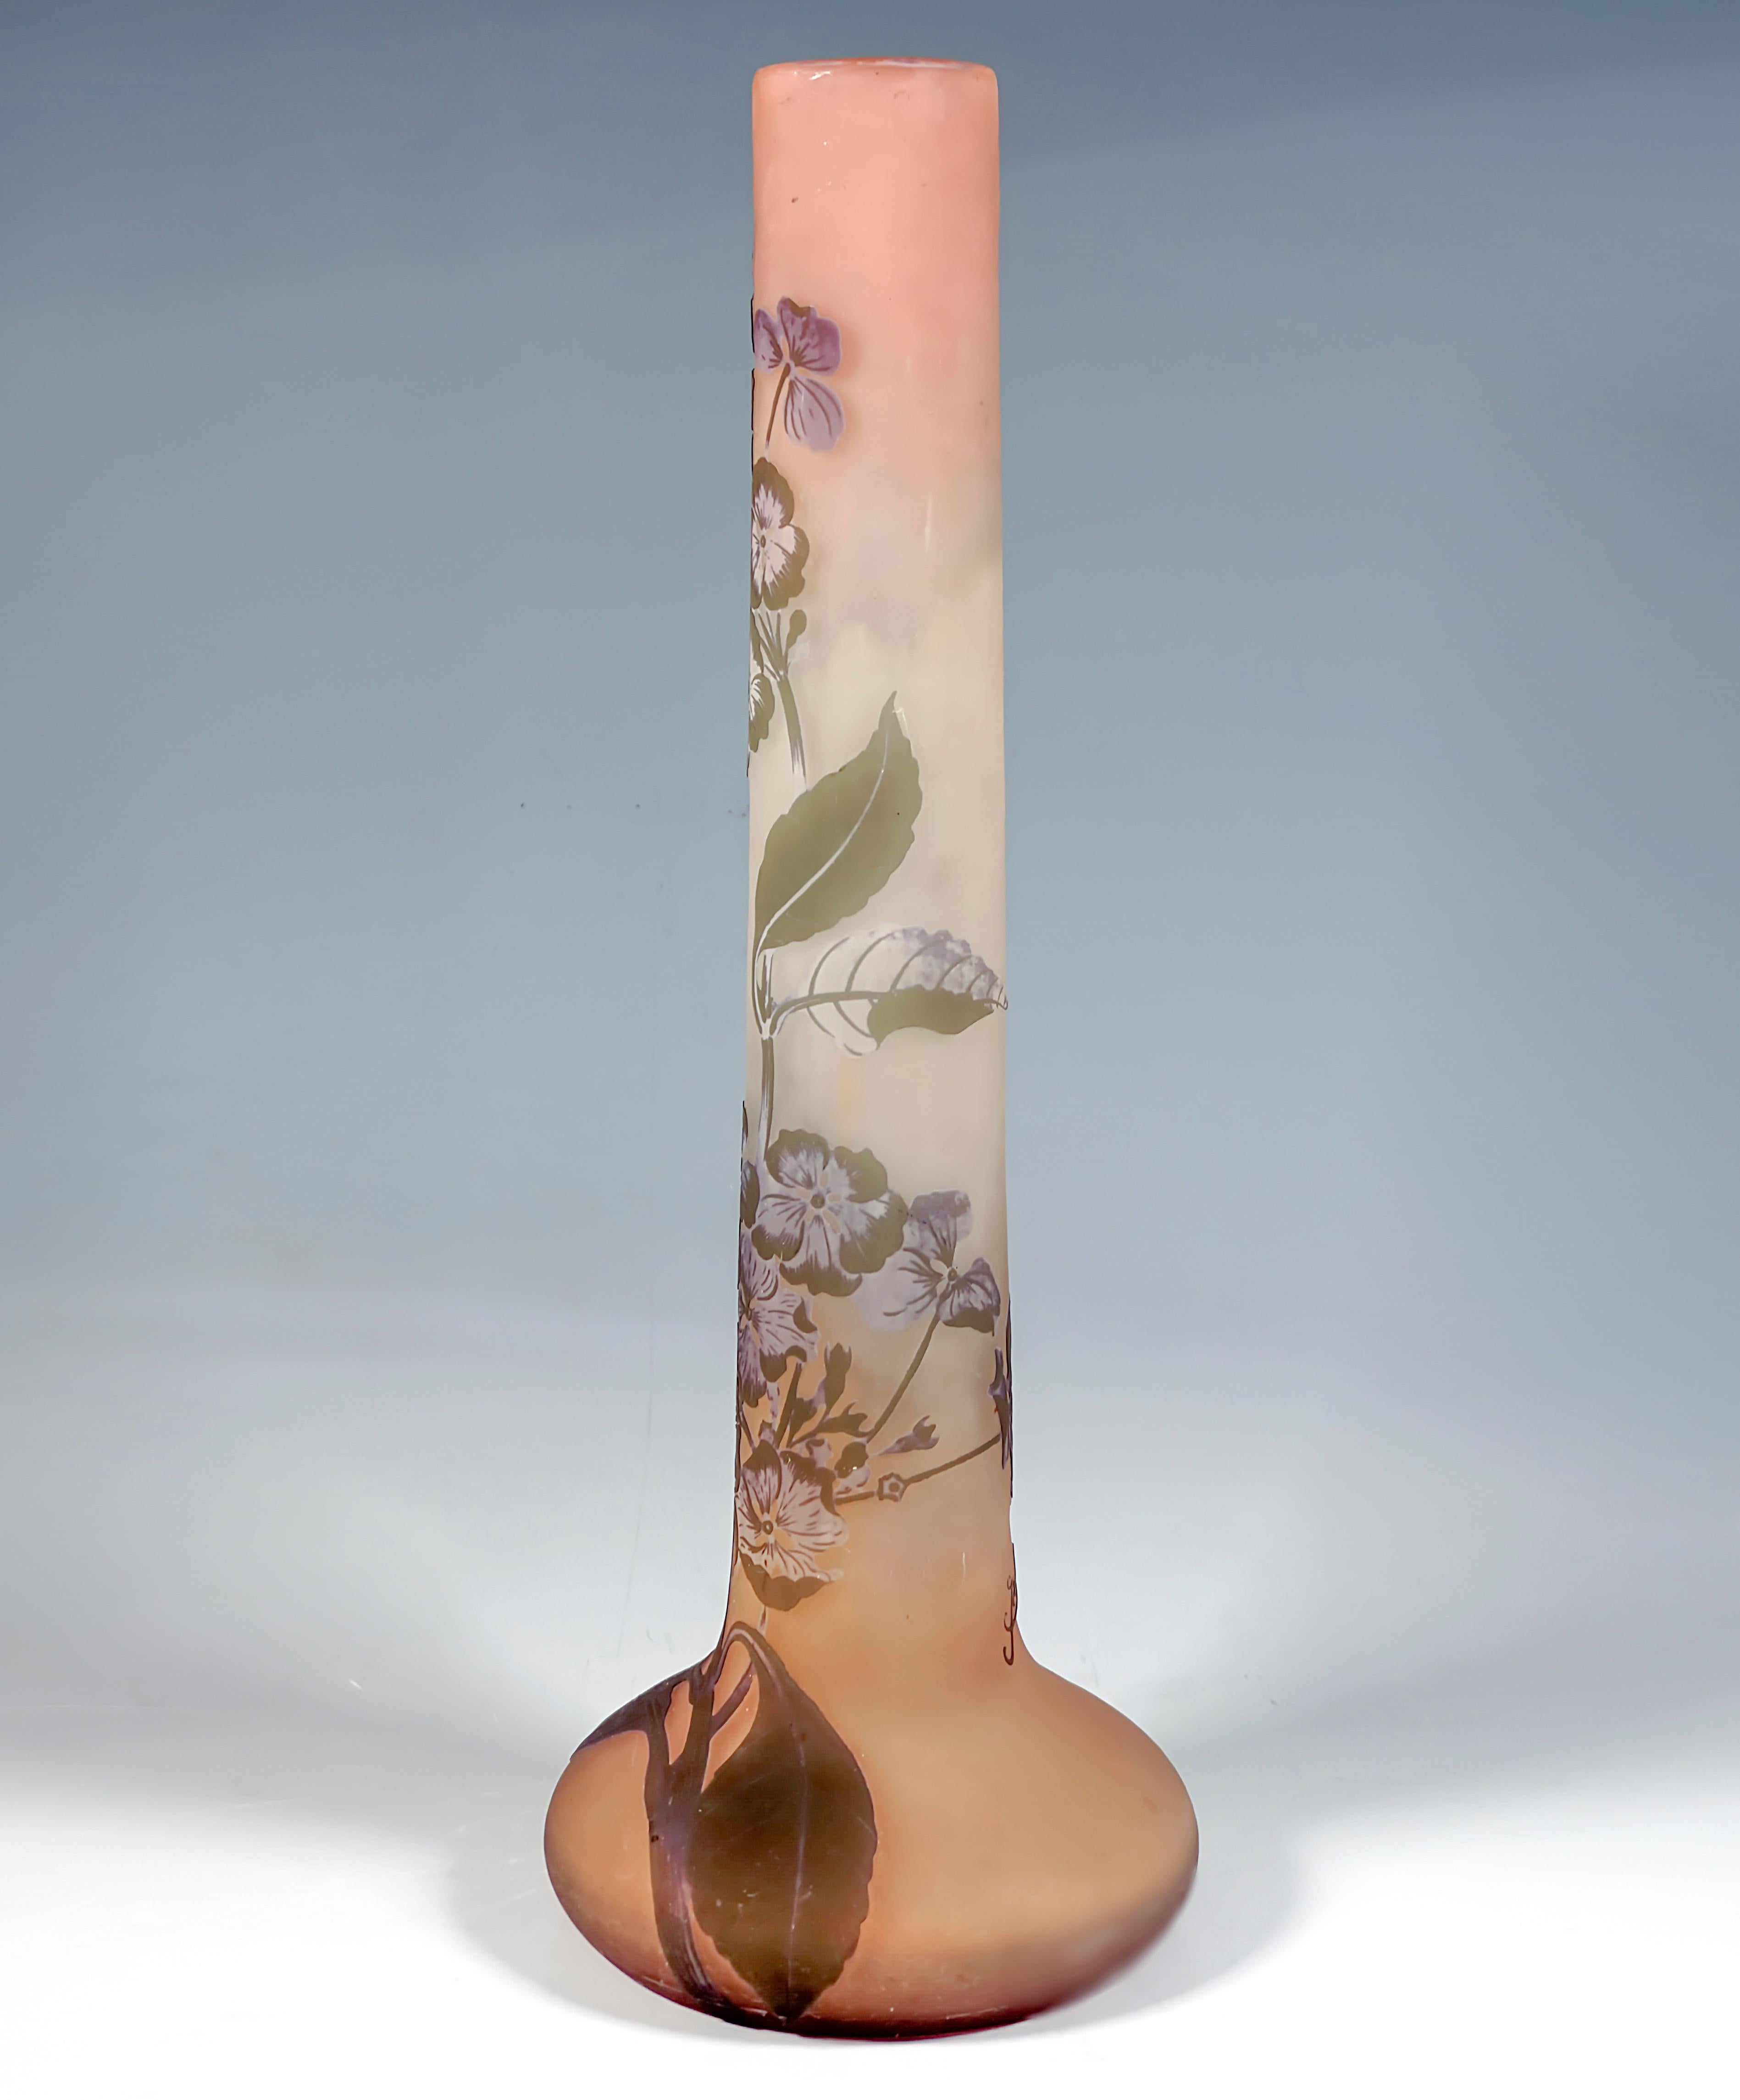 Tall rod vase with a slender, straight neck with a flat, bulbous body in the flush standing area, colorless glass with yellow and reddish colored powder inclusions, overlay in moss green and violet, in various stages highly etched hydrangea